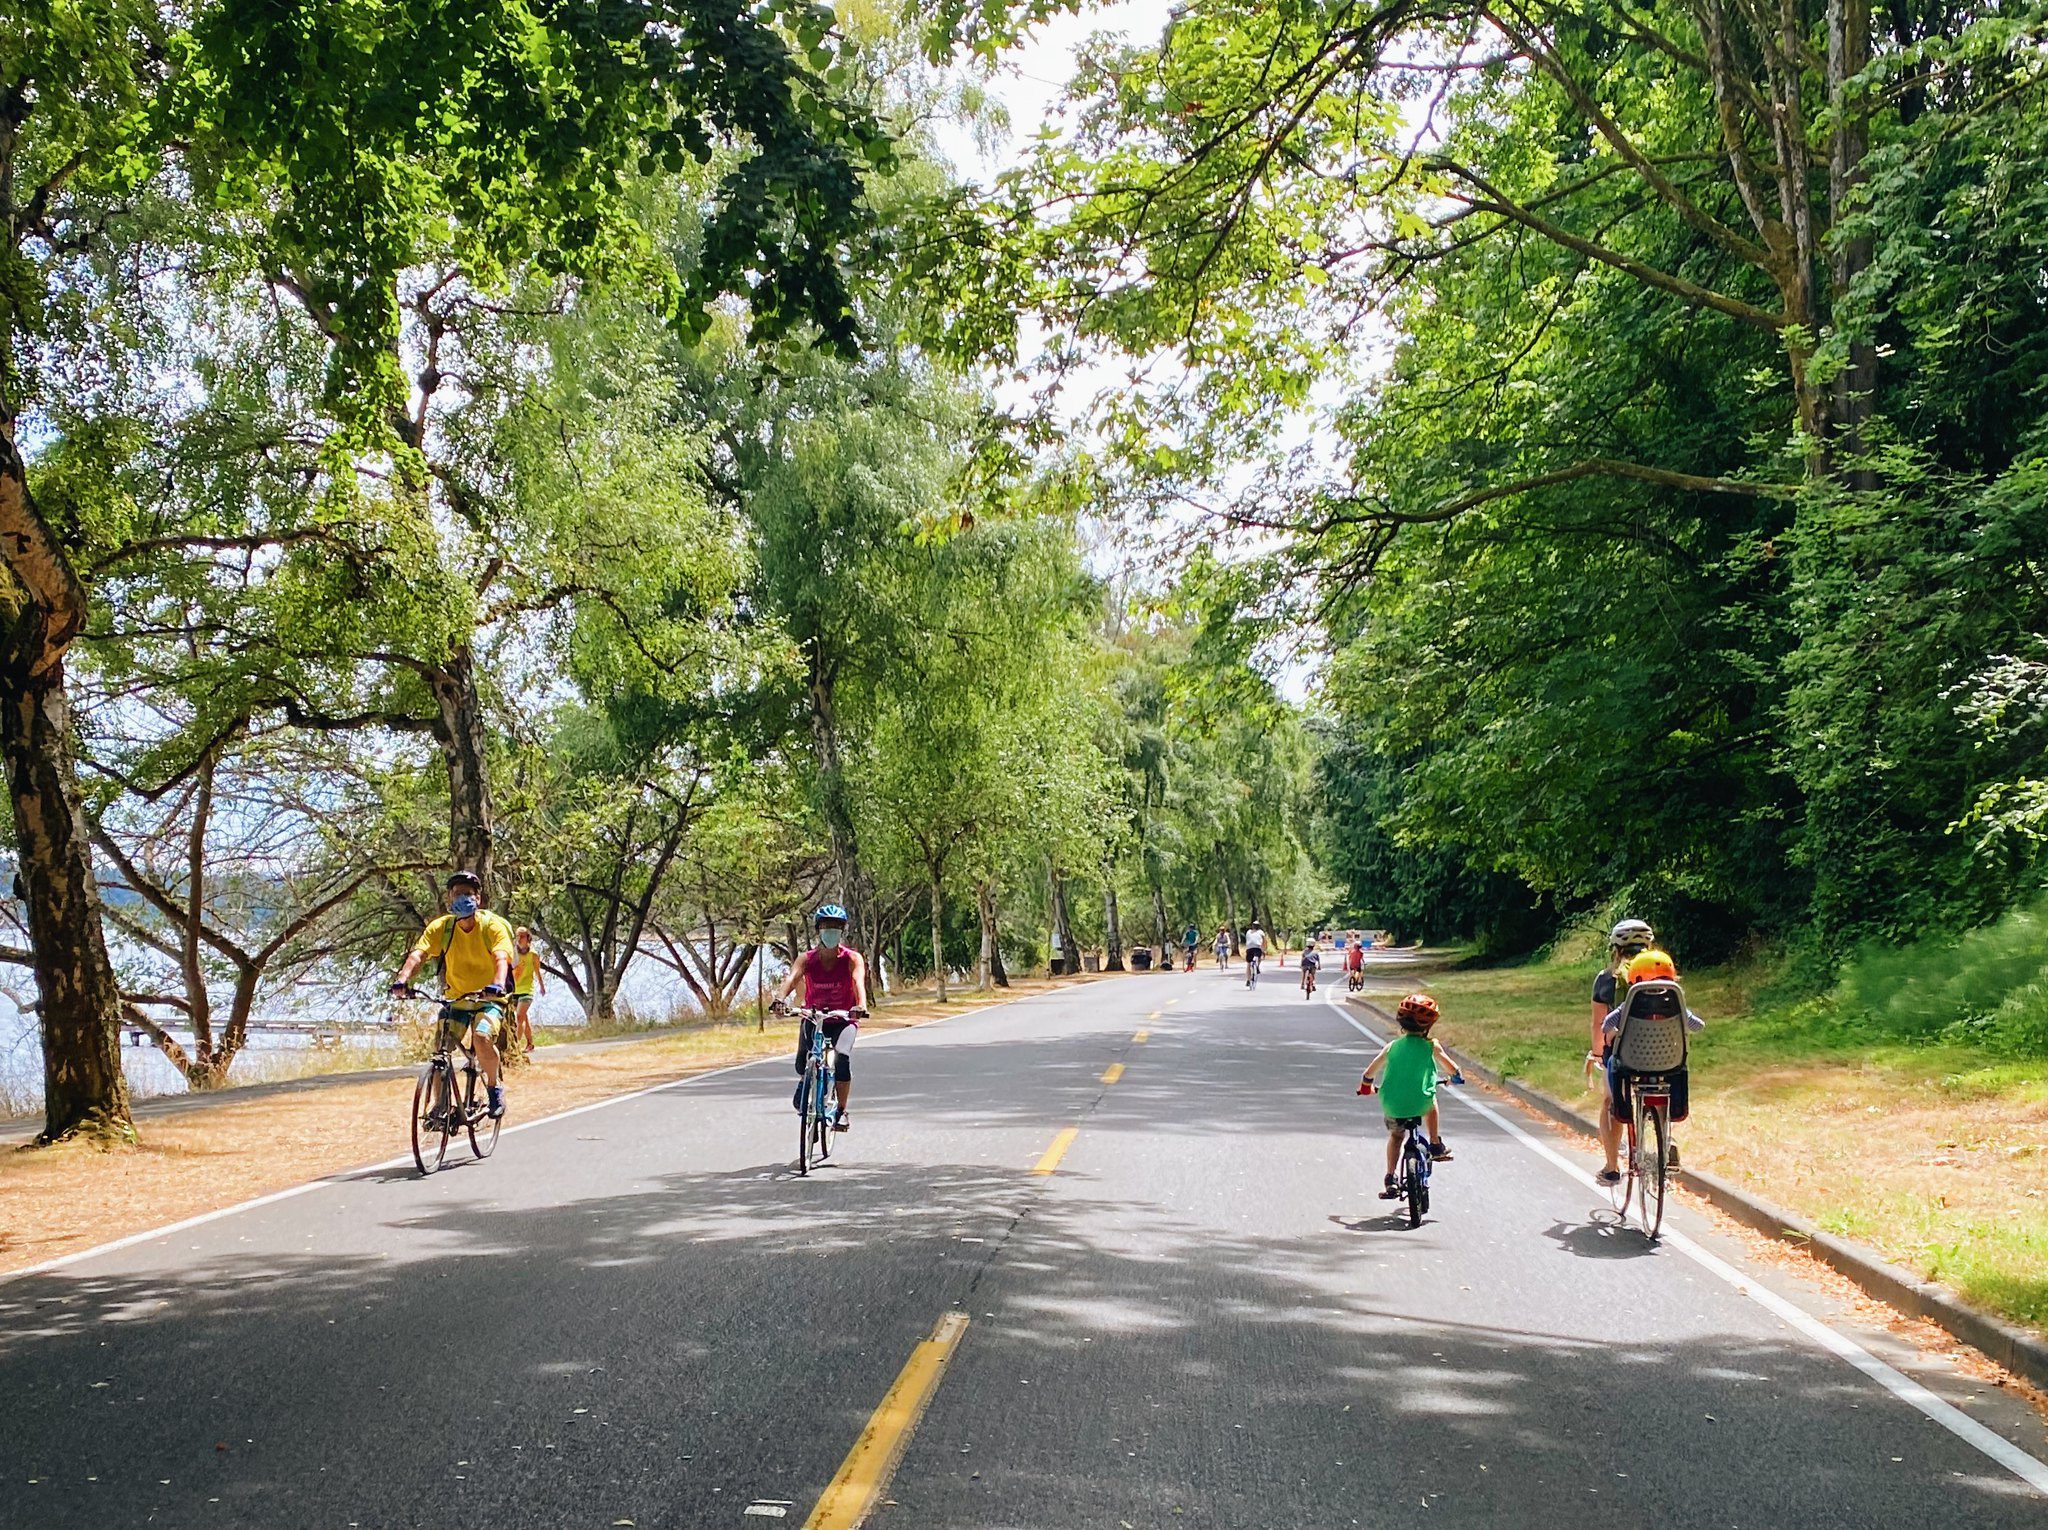 Community members biking along Lake Washington Blvd during a previous summer closure of the street. On the right side, a couple youngsters enjoy the sunny day and view of green trees lining the street.